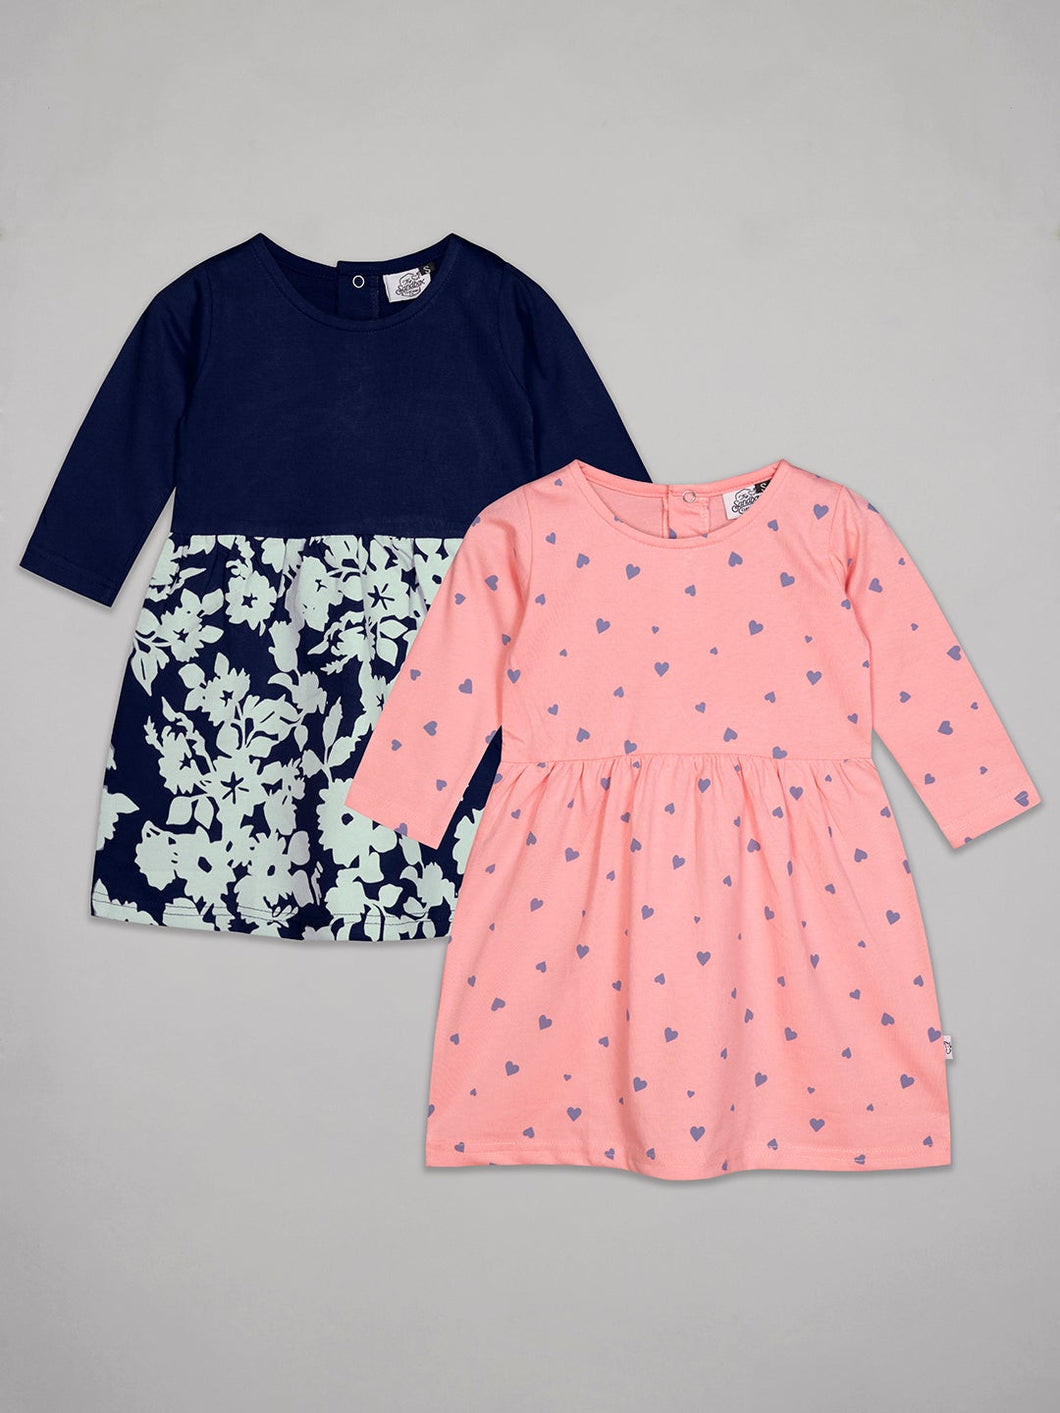 Pack of 2 round neck 3/4th sleeves heart and floral print pink and navy knee length girls dress